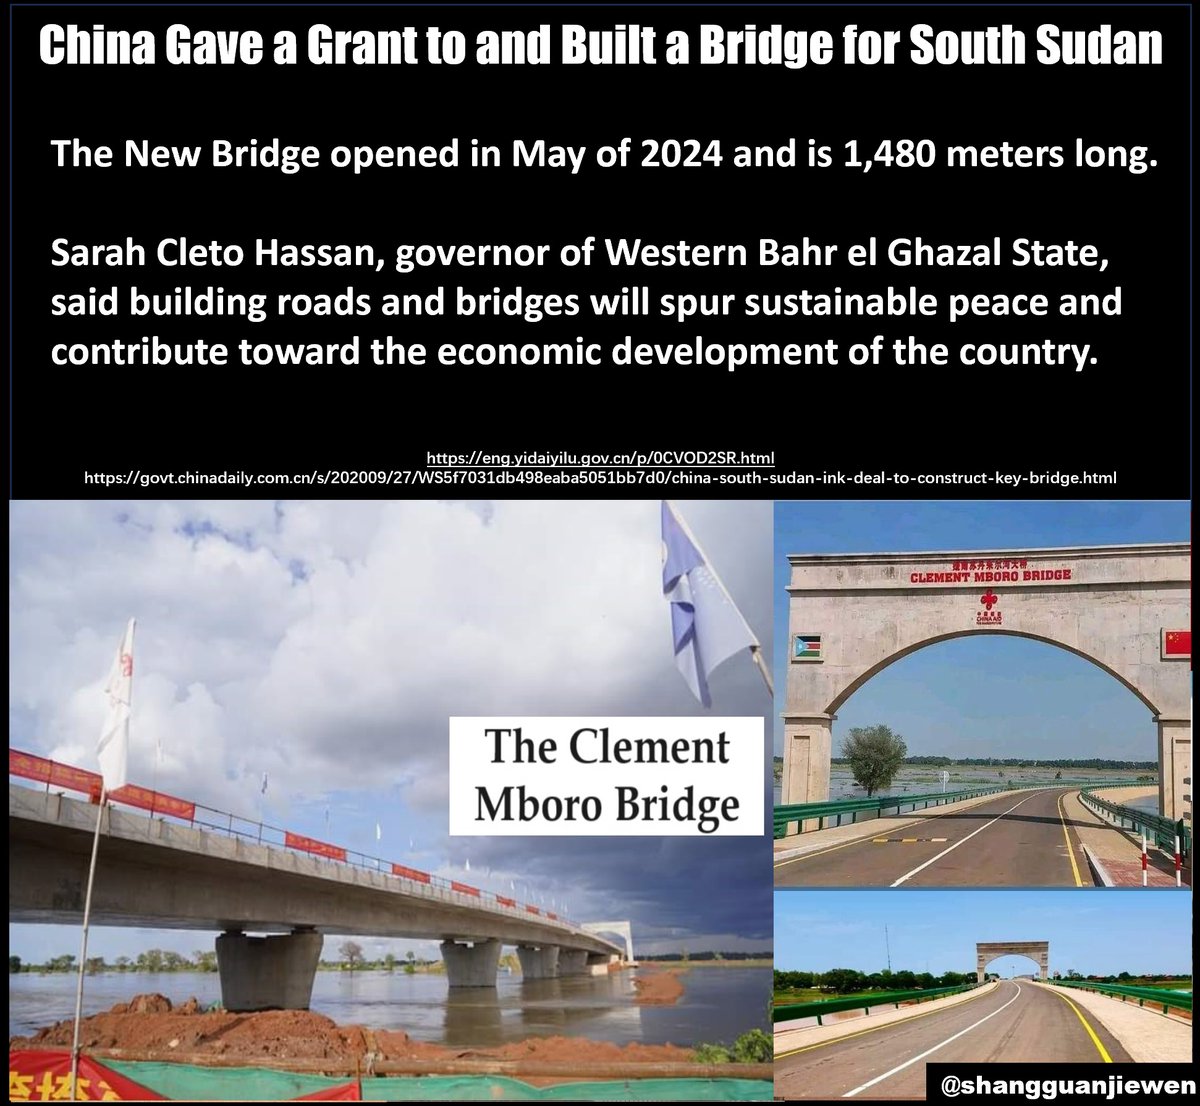 The recently finished Jur River Bridge, also known as the Clement Mboro Bridge, was handed over to the South Sudanese government by the Chinese embassy on Monday.

The bridge was fully paid for and built by China as a gift for South Sudan.

#Africa #Sudan #BeltandRoad